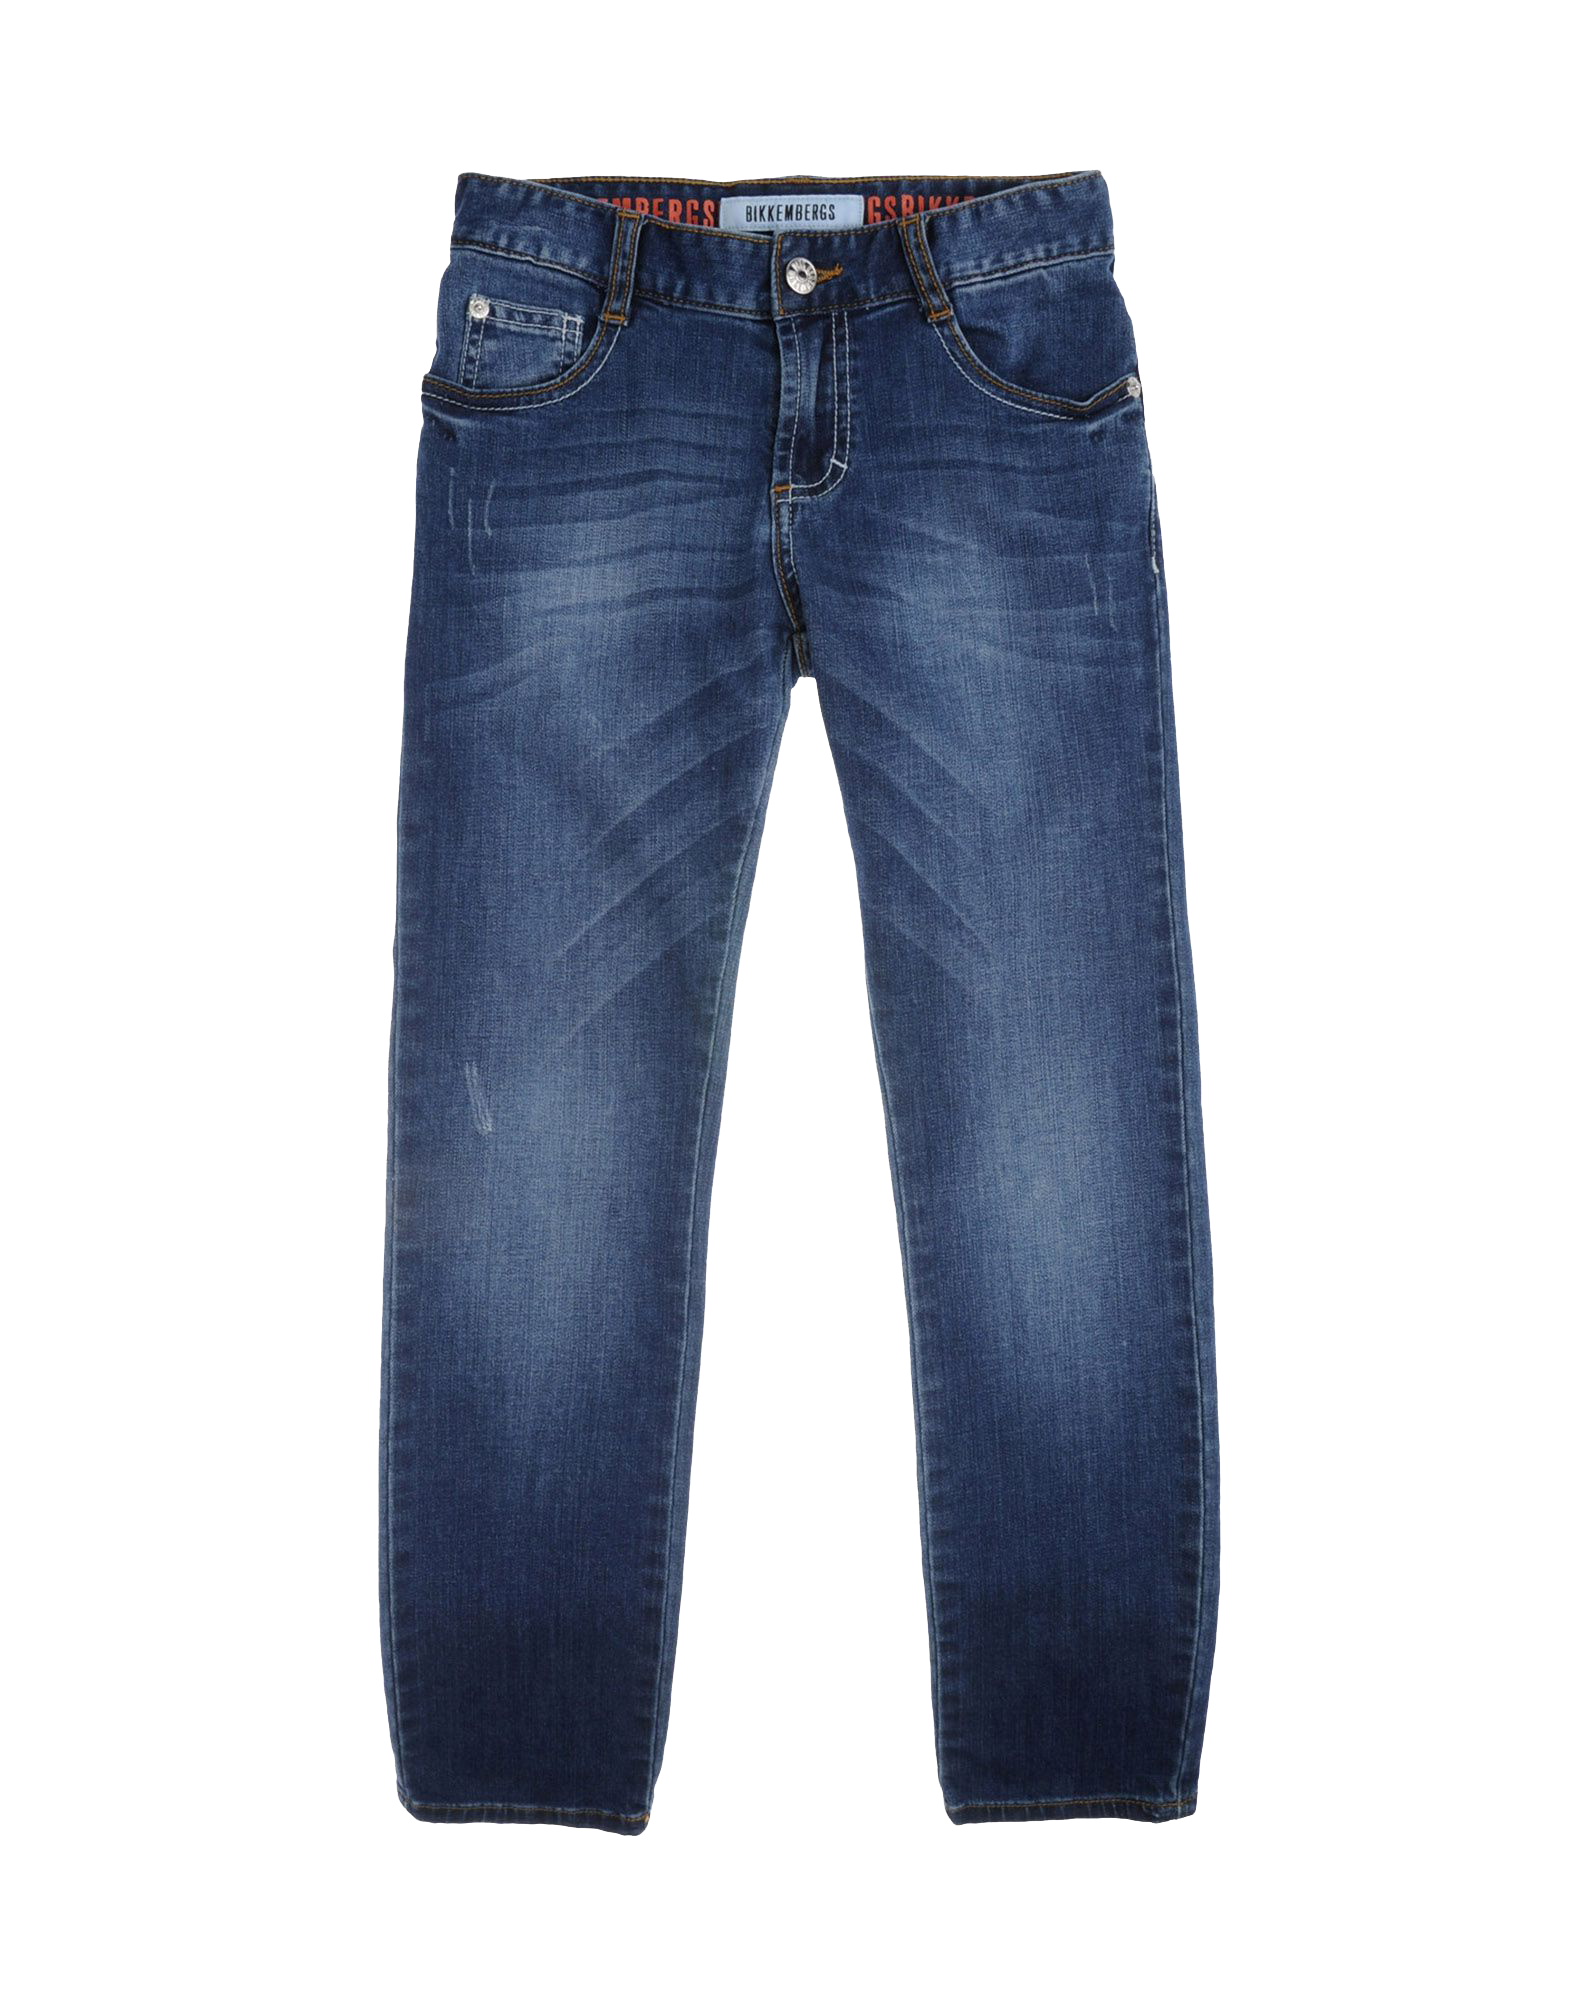 Jeans Pant Jeans Png Image Hd - Clip Art Library